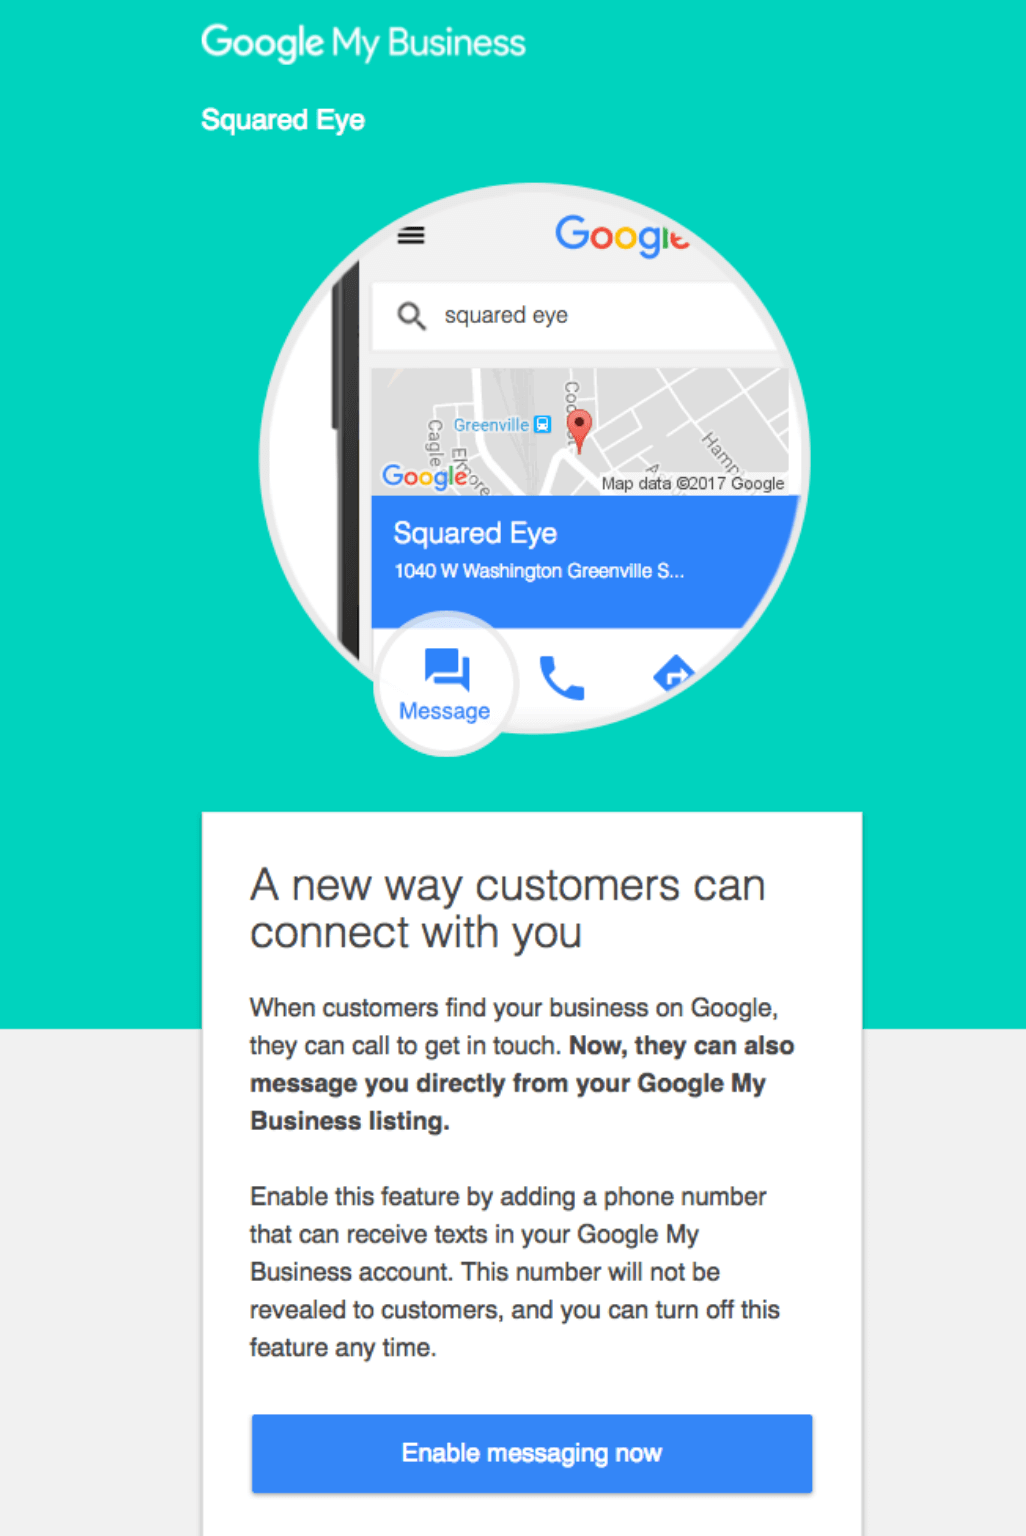 Email from Google My Business